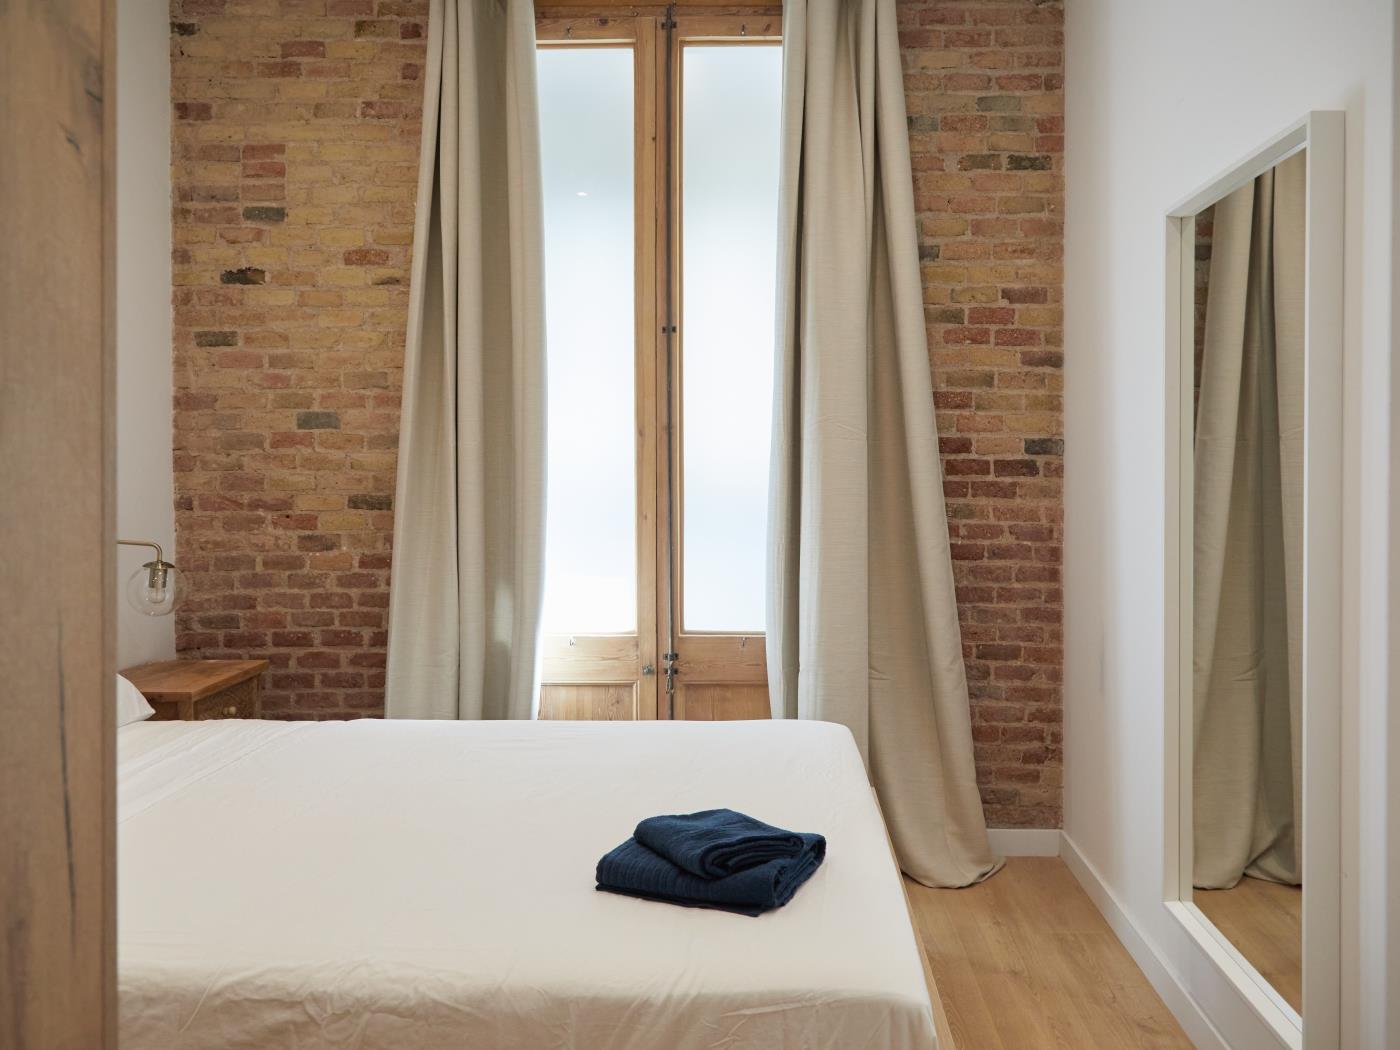 Brand new mid-term one-bedroom apartment for rent in Gracia - My Space Barcelona Apartments